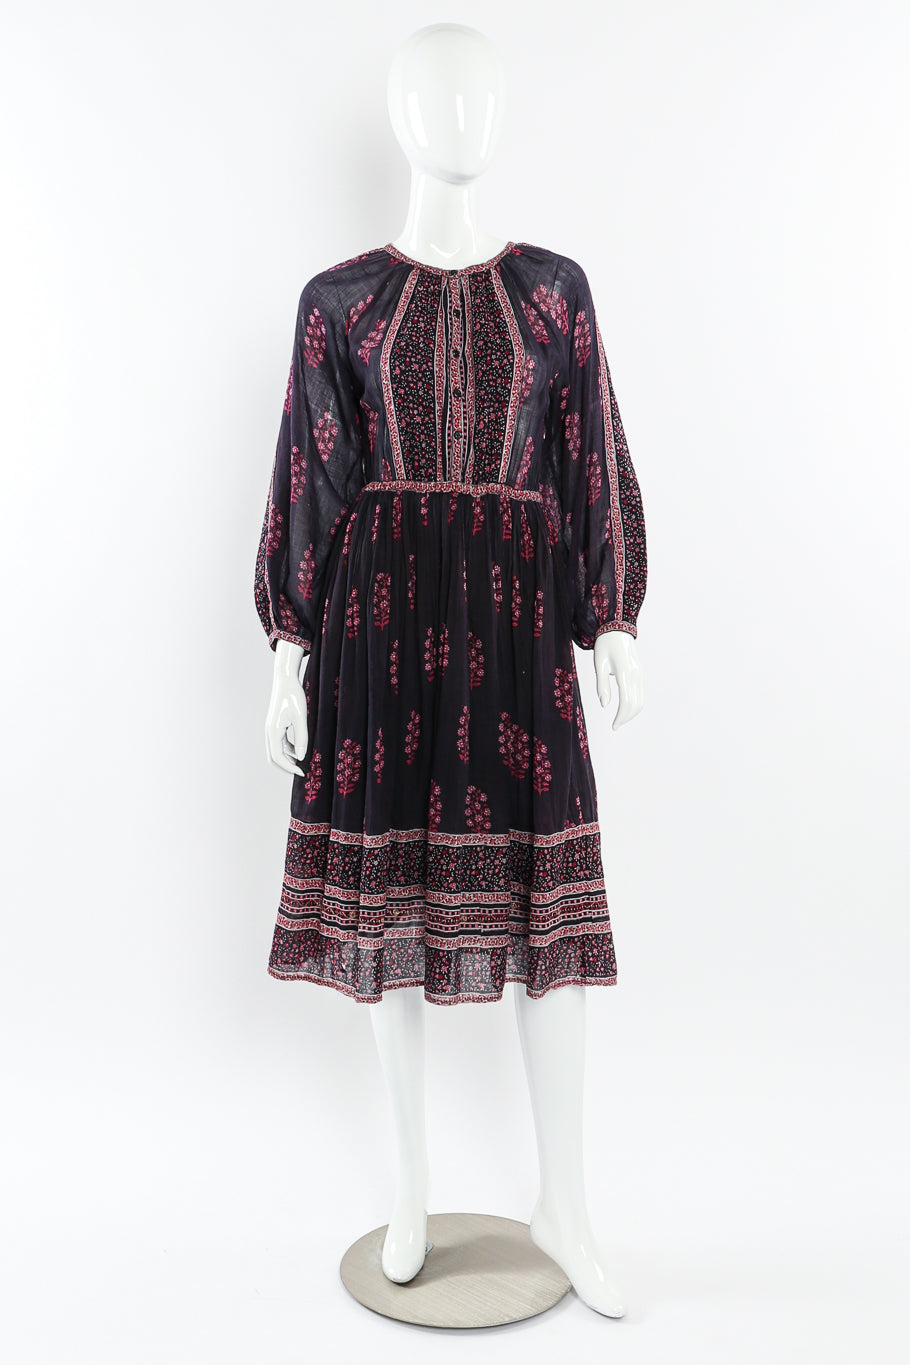 Cotton peasant dress by Mayur on mannequin front closed @recessla